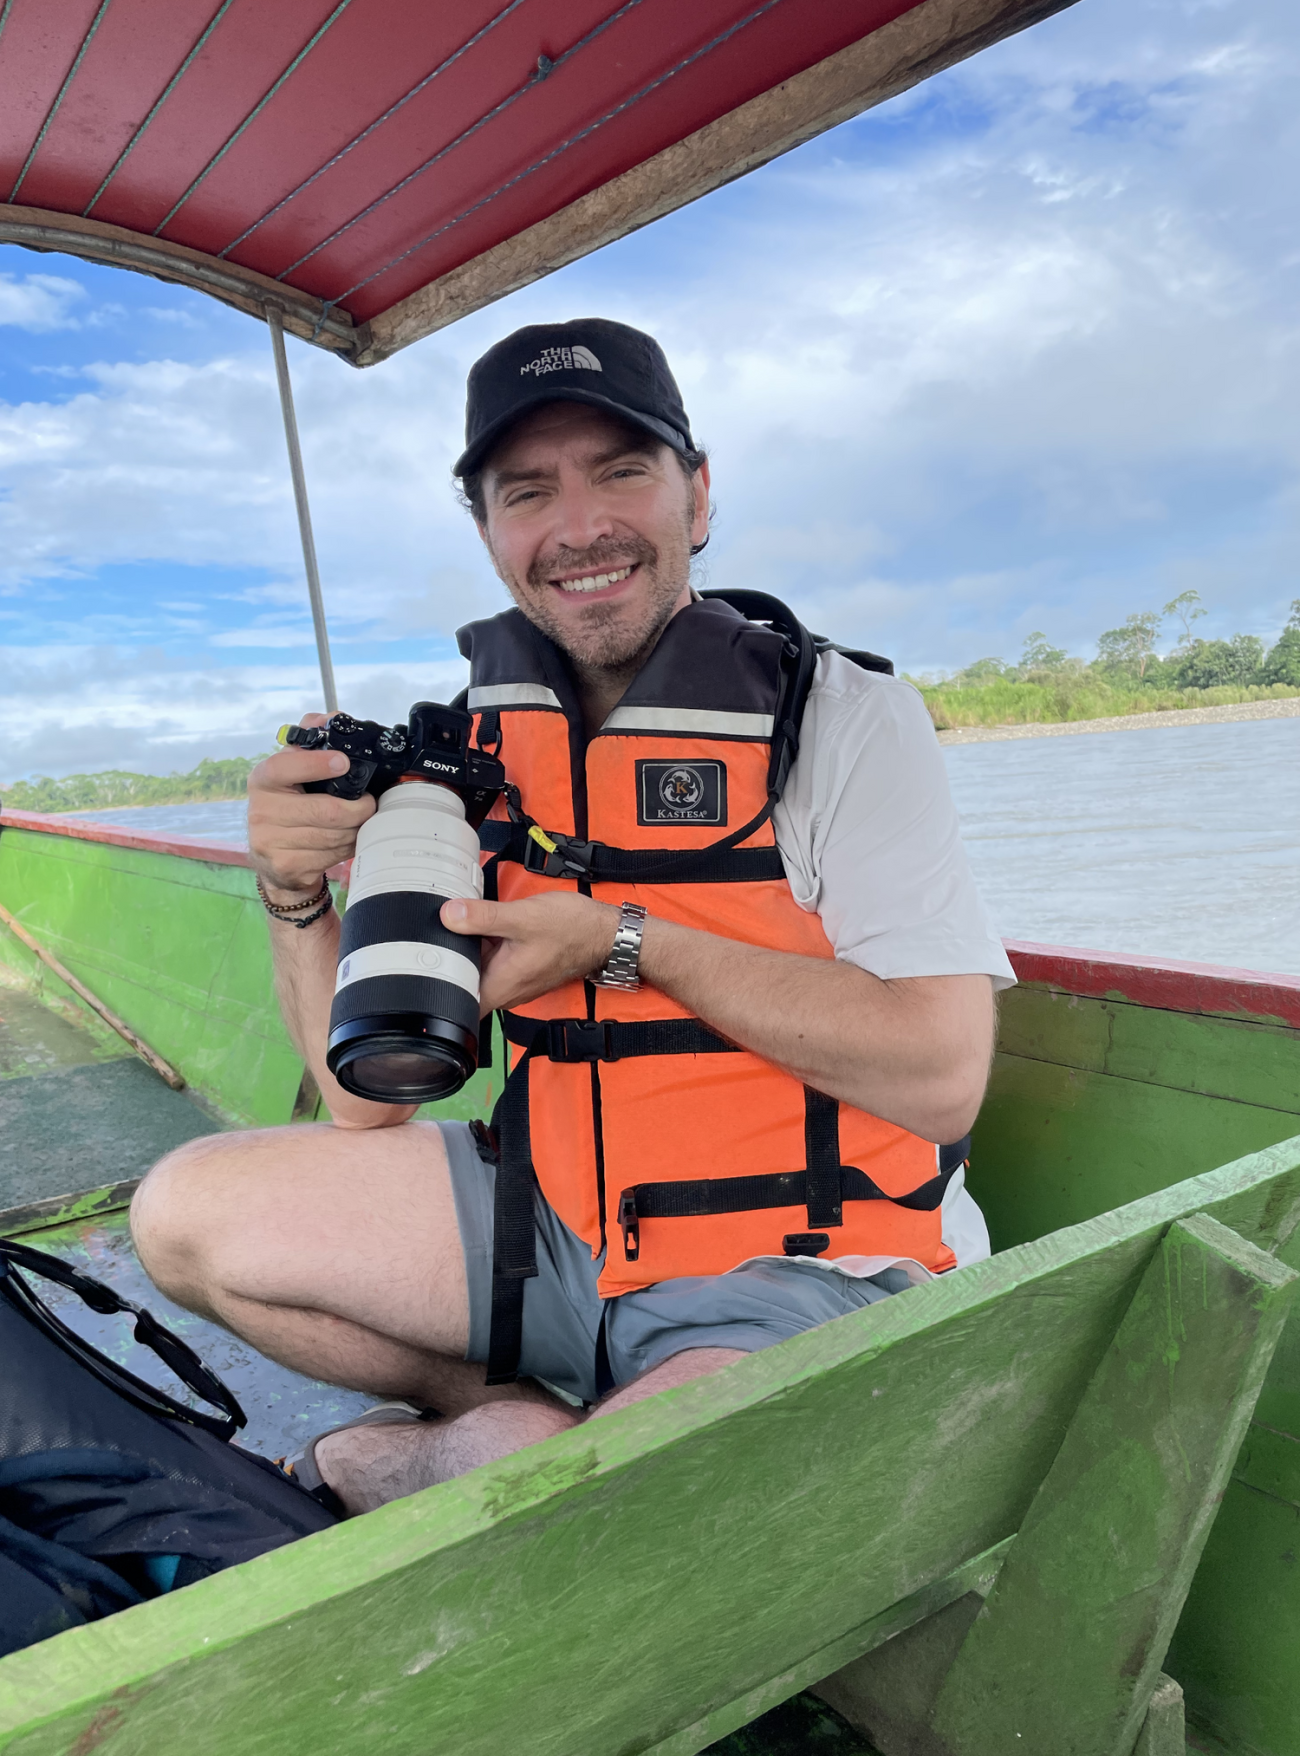 Sitting cross-legged in the bow of a colorful, wooden river boat wearing a orange life jacket and shorts, Sean cradles a Sony with a long telephoto lens.